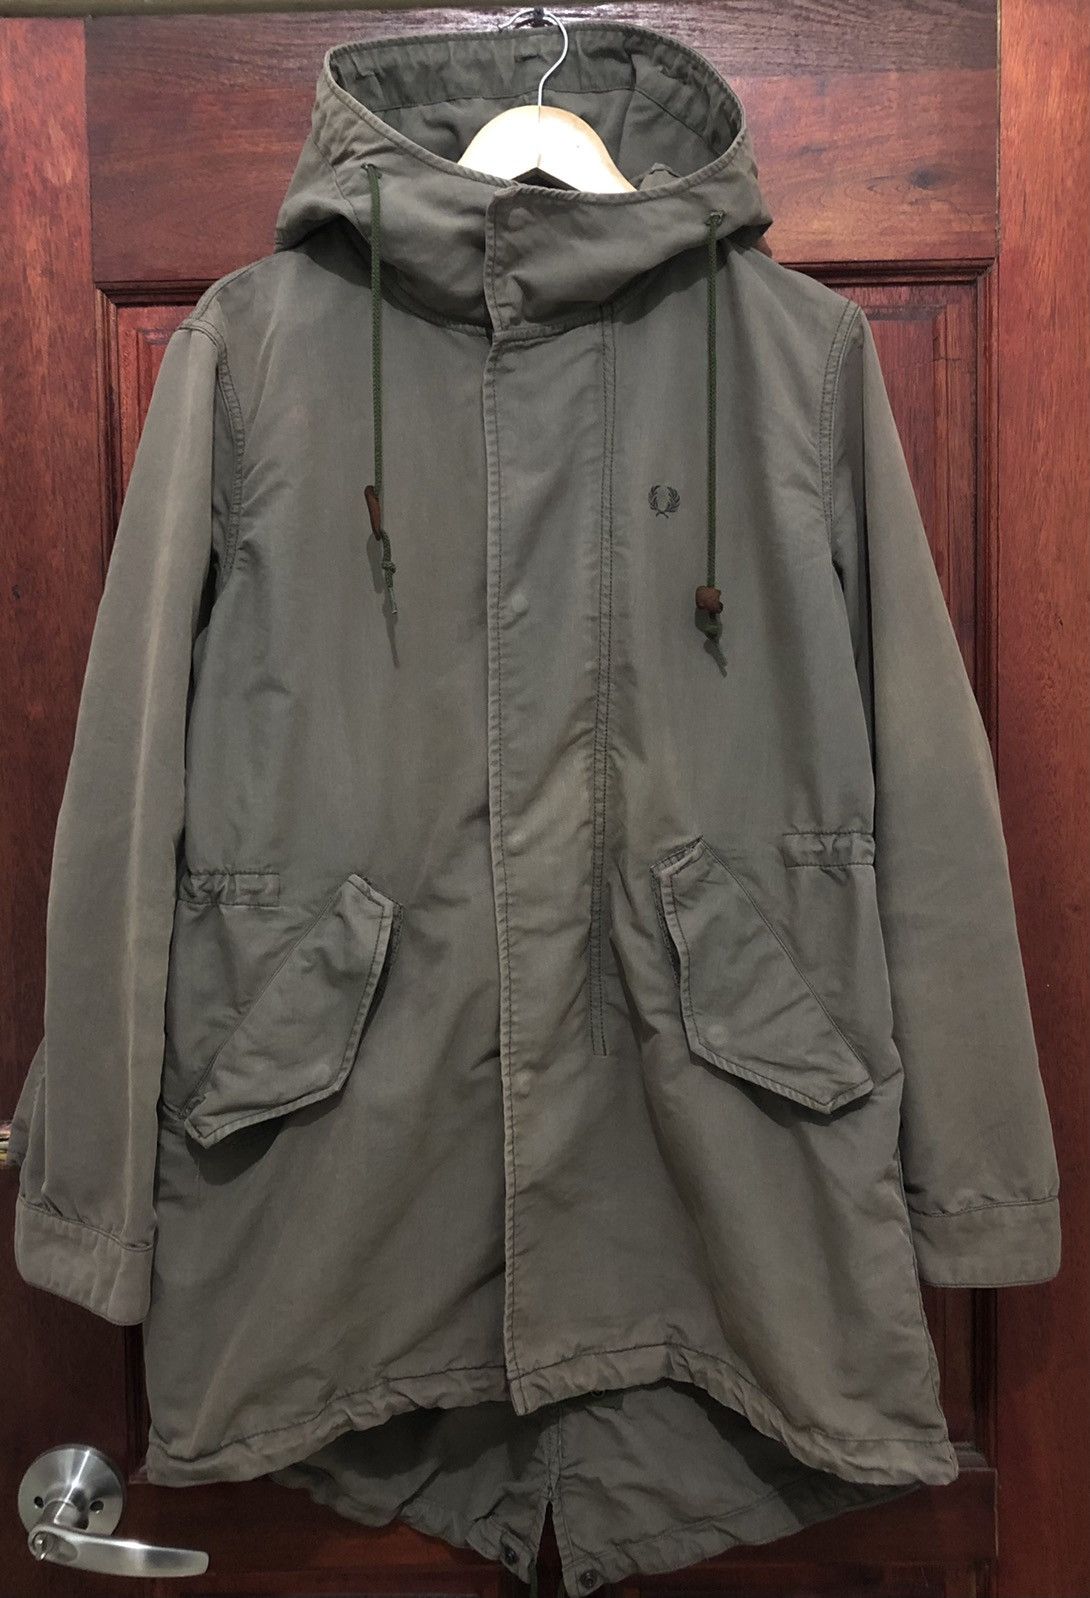 Fred Perry Military Fishtail Jacket - 5